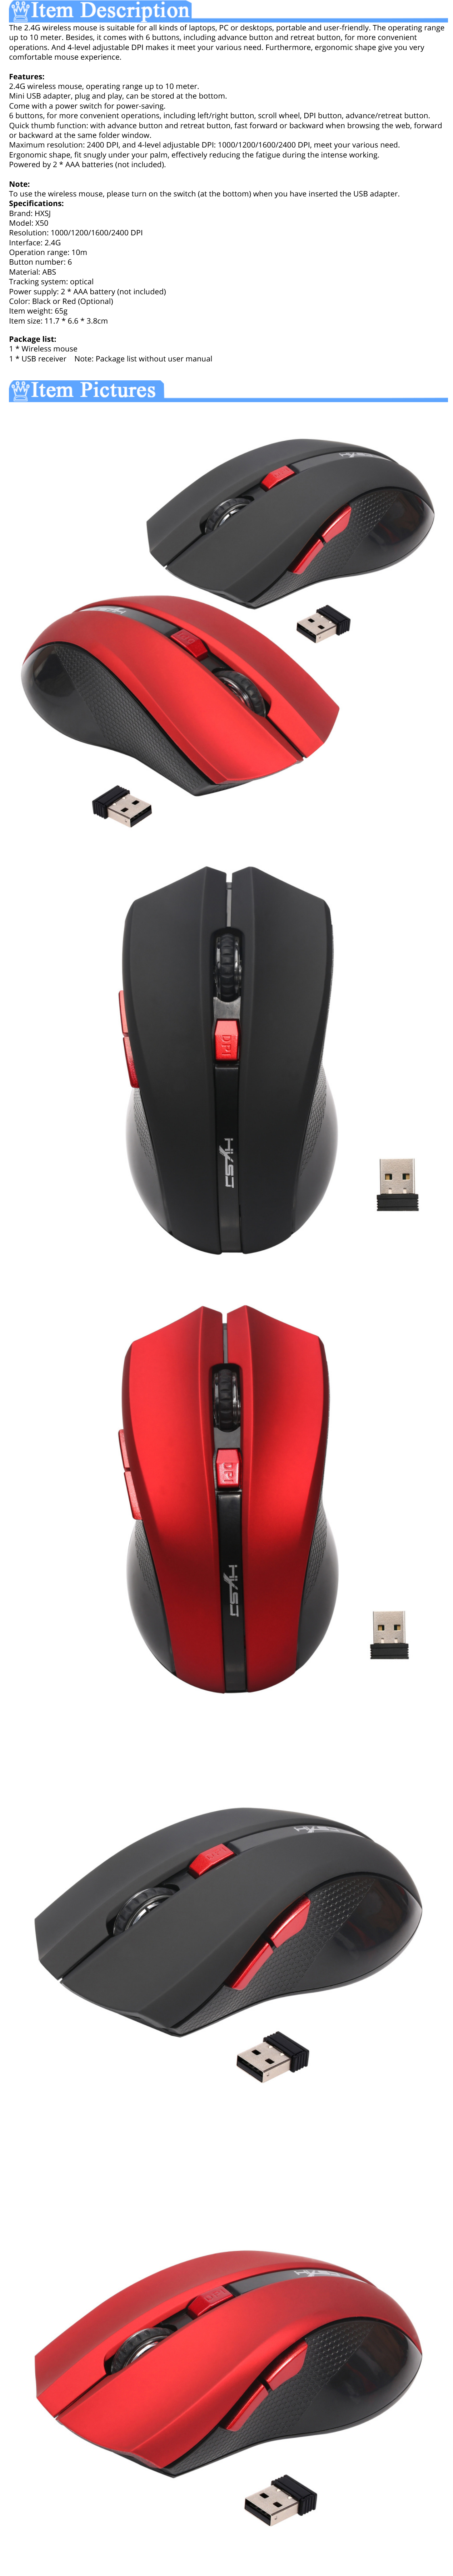 X50 2.4G Wireless USB Optical Gaming Mouse Game Mice 2,400 DPI for Laptop PC 